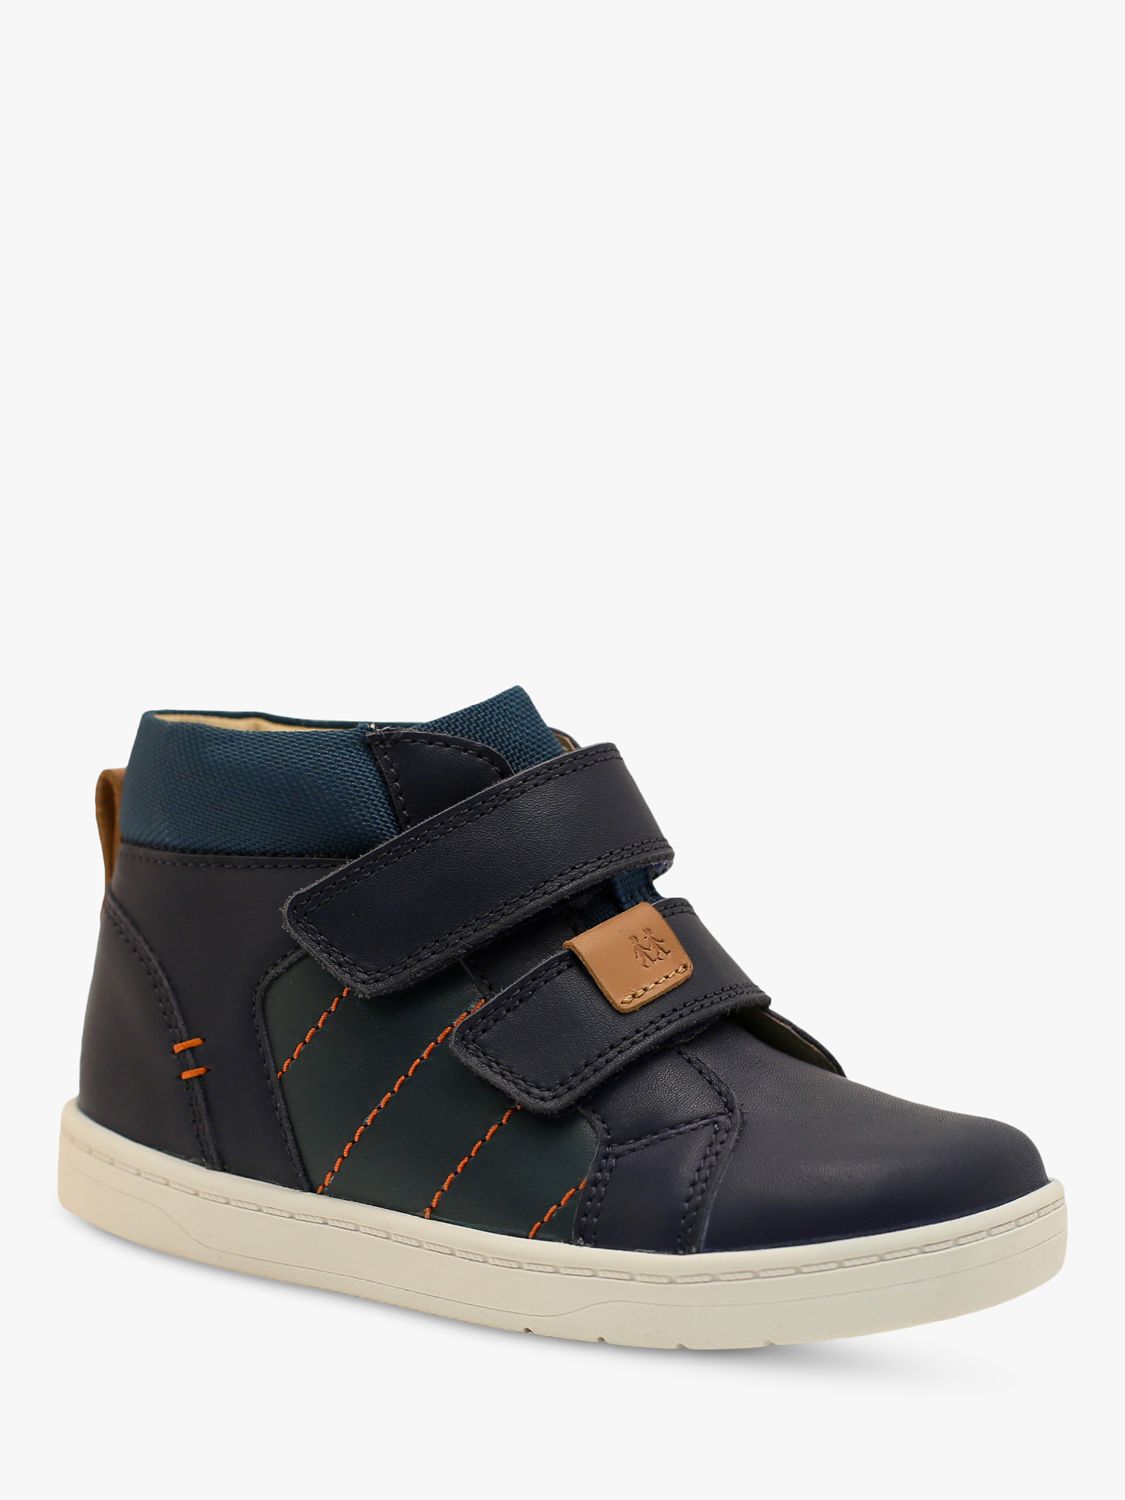 Buy Start-Rite Kids' Discover High Top Trainers Online at johnlewis.com